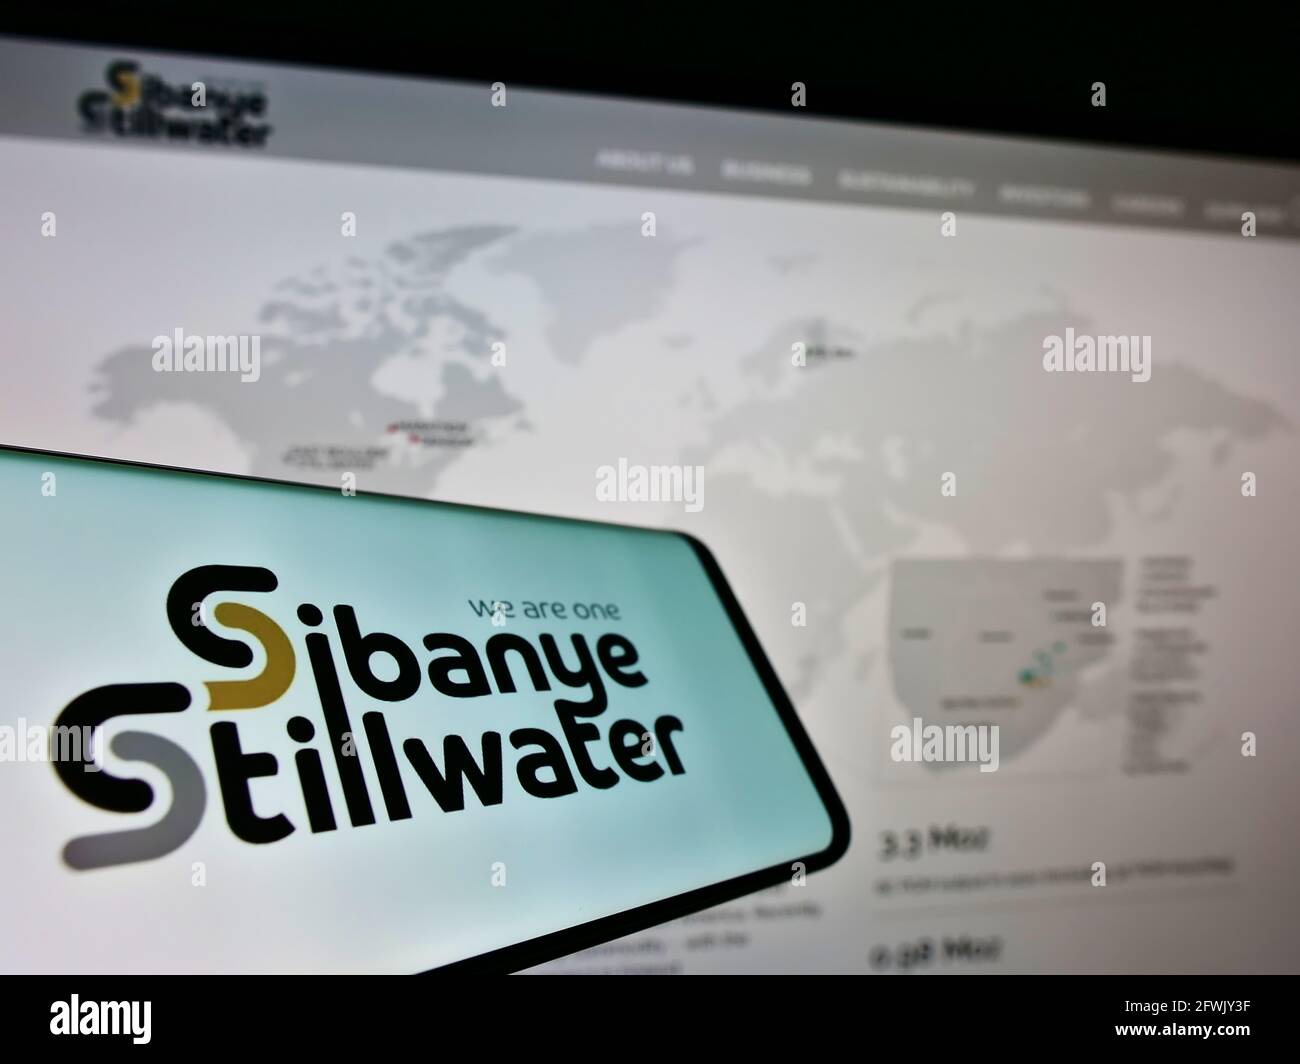 Cellphone with logo of South African mining company Sibanye Stillwater Limited on screen in front of web page. Focus on center of phone display. Stock Photo